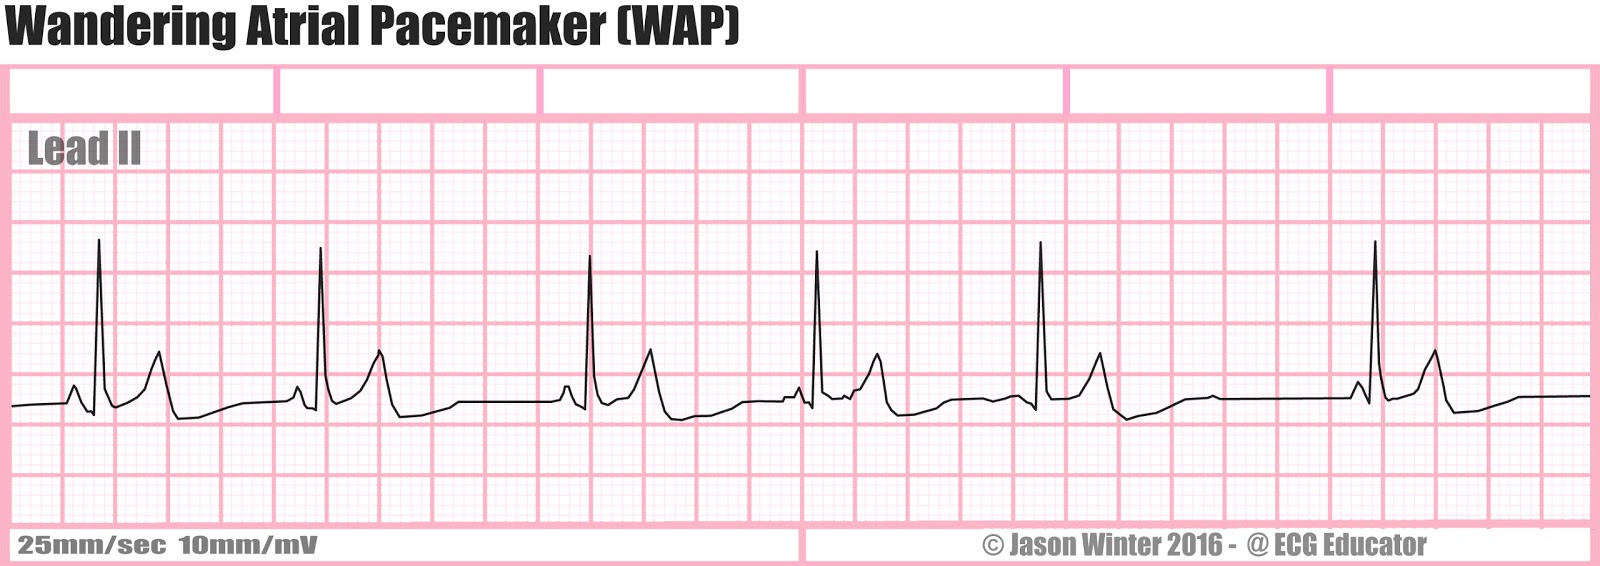 wandering pacemaker therapy